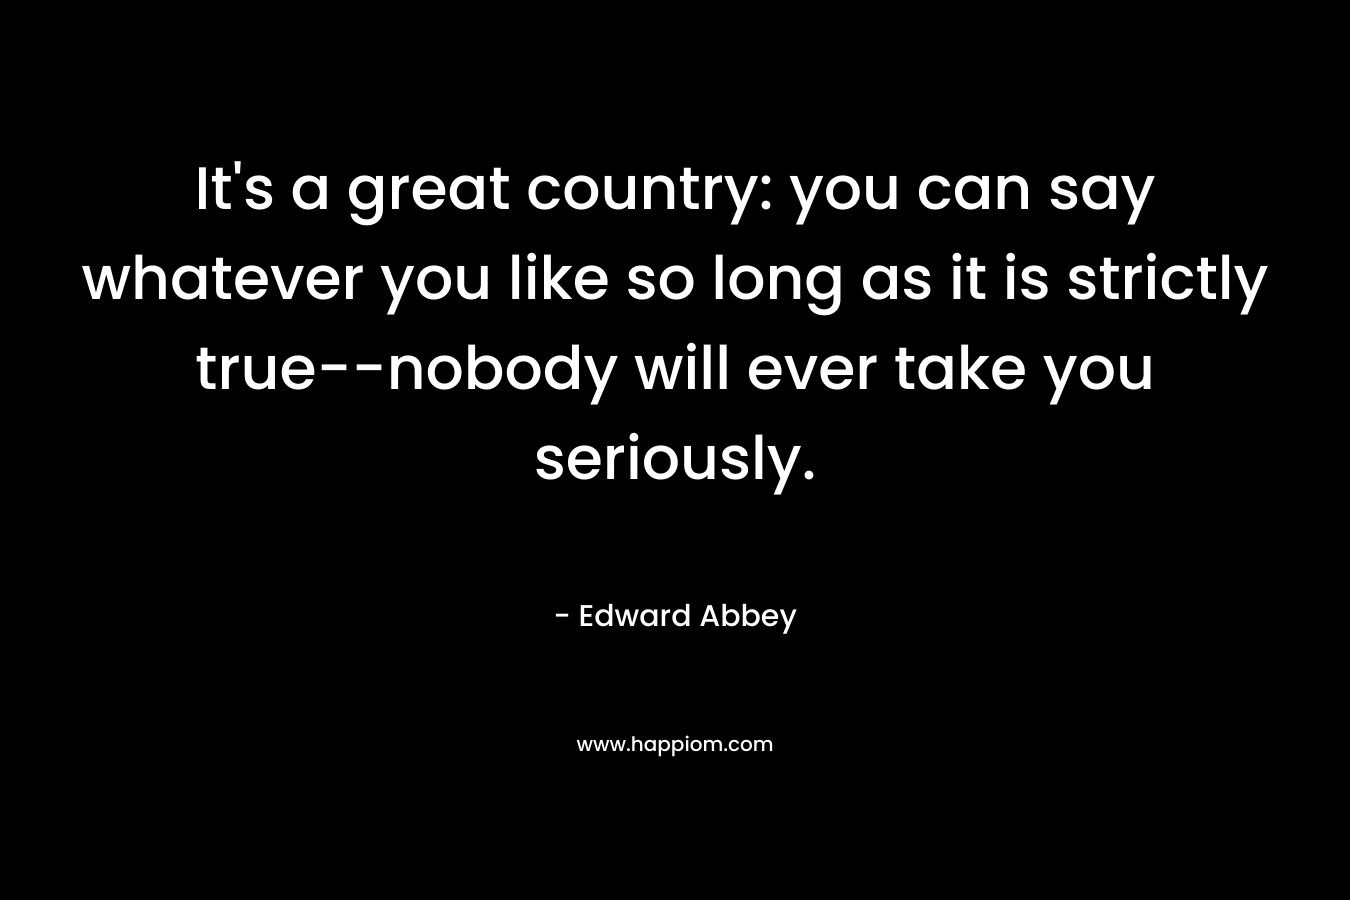 It’s a great country: you can say whatever you like so long as it is strictly true–nobody will ever take you seriously. – Edward Abbey